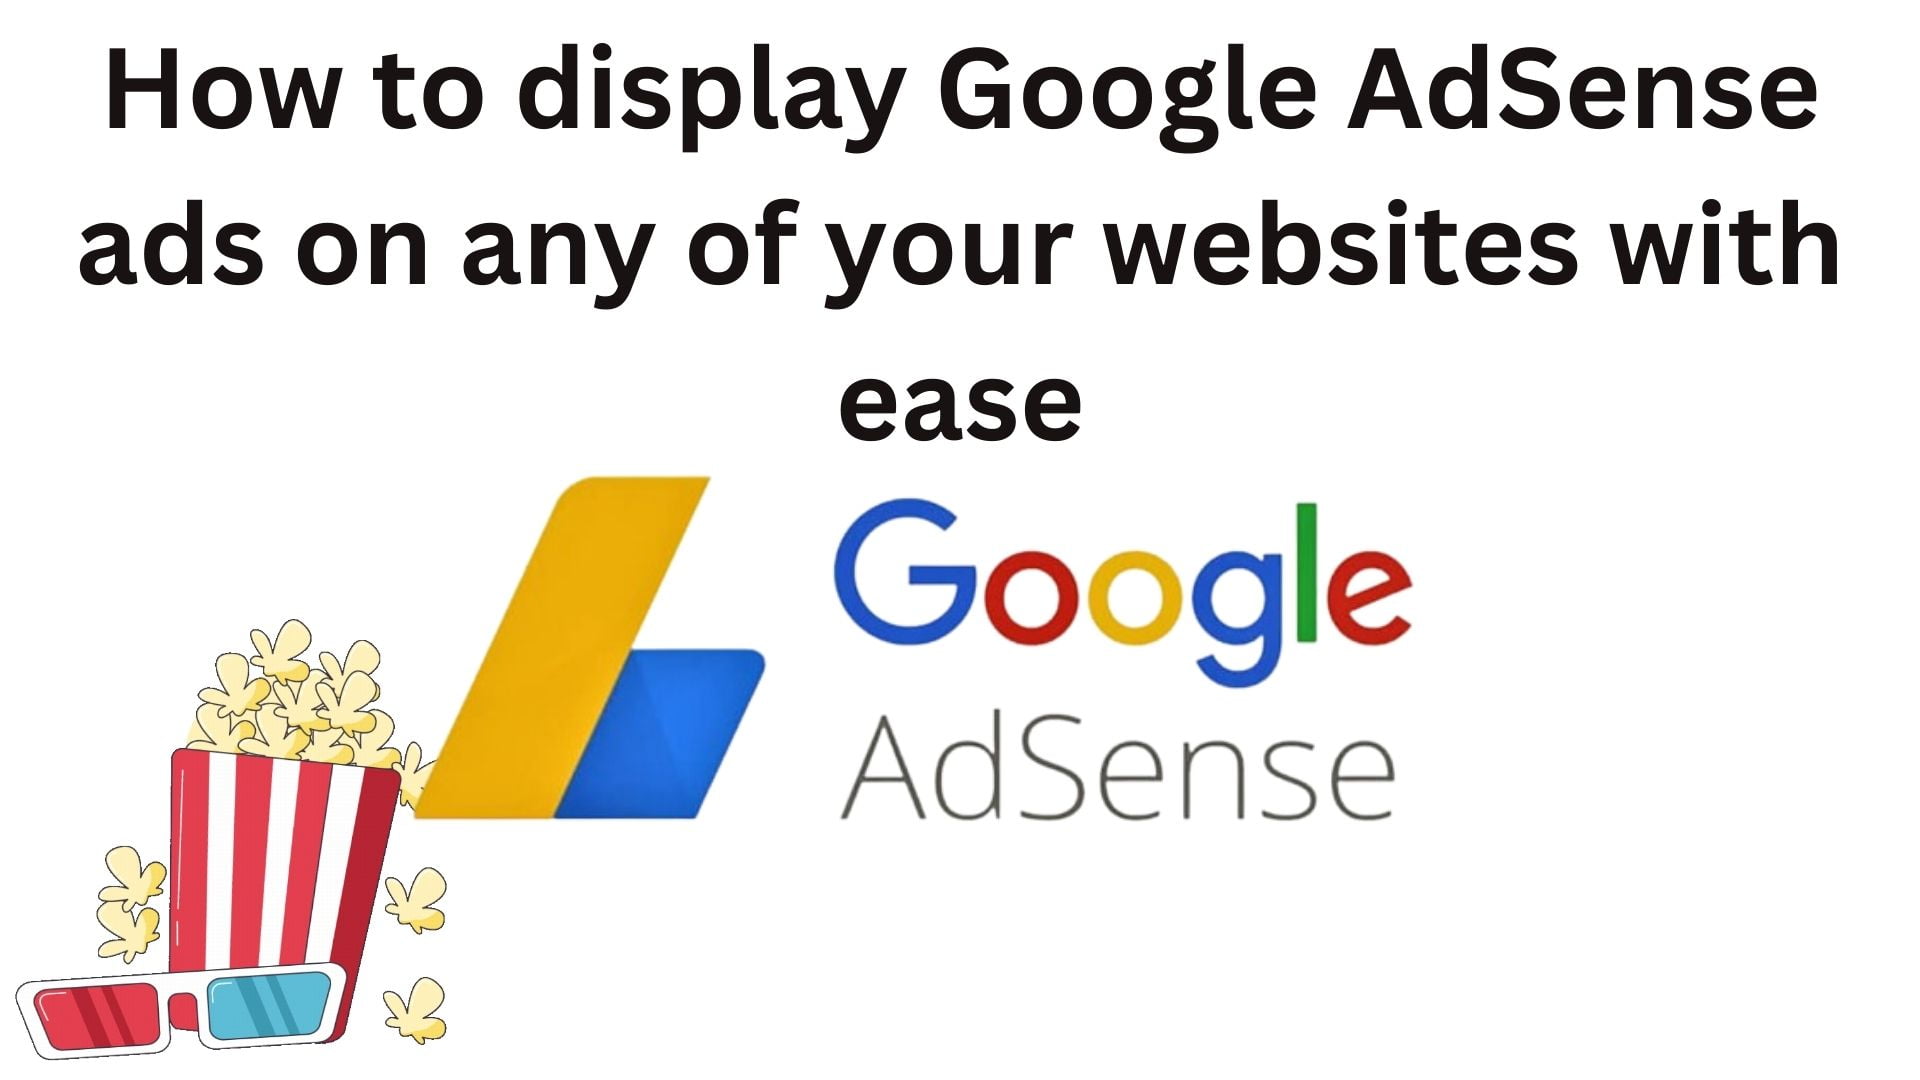 How To Display Google Adsense Ads On Any Of Your Websites With Ease